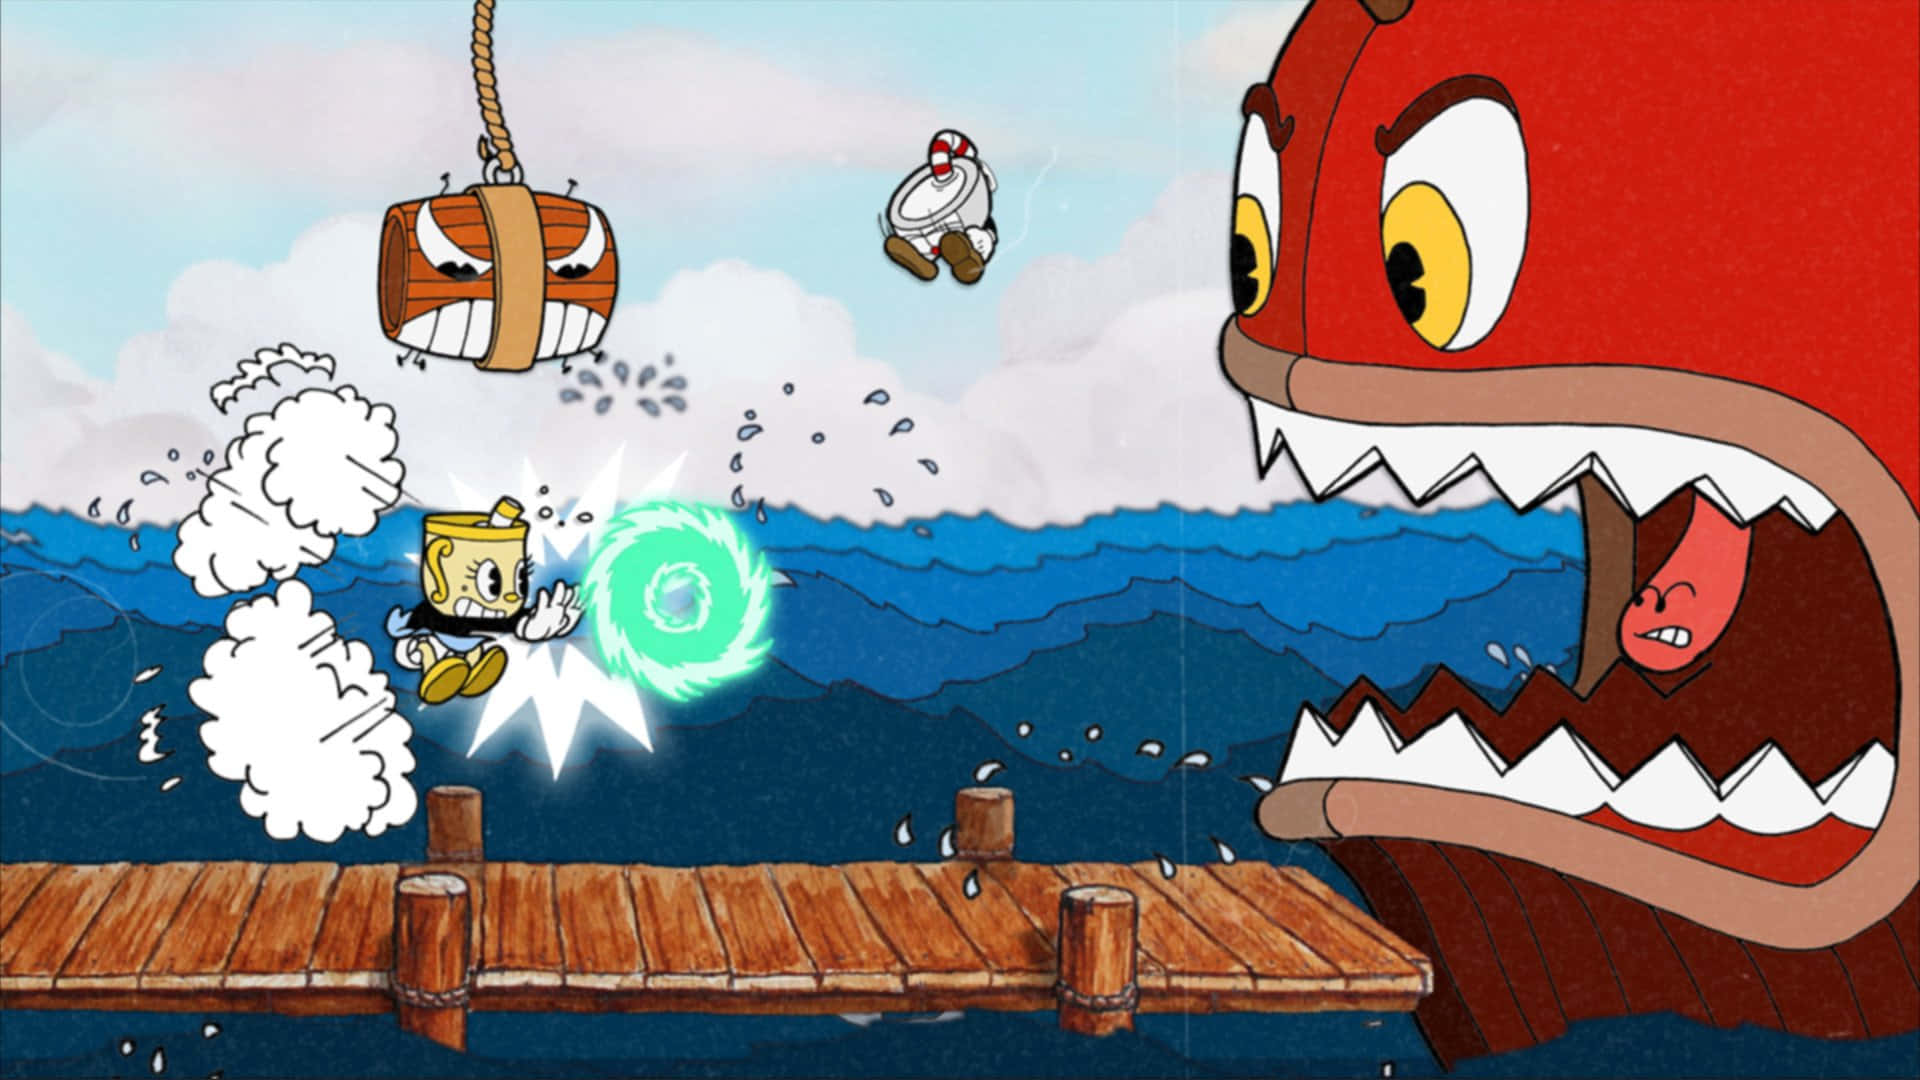 "The iconic Cuphead duo take on their enemies in their epic adventure!"